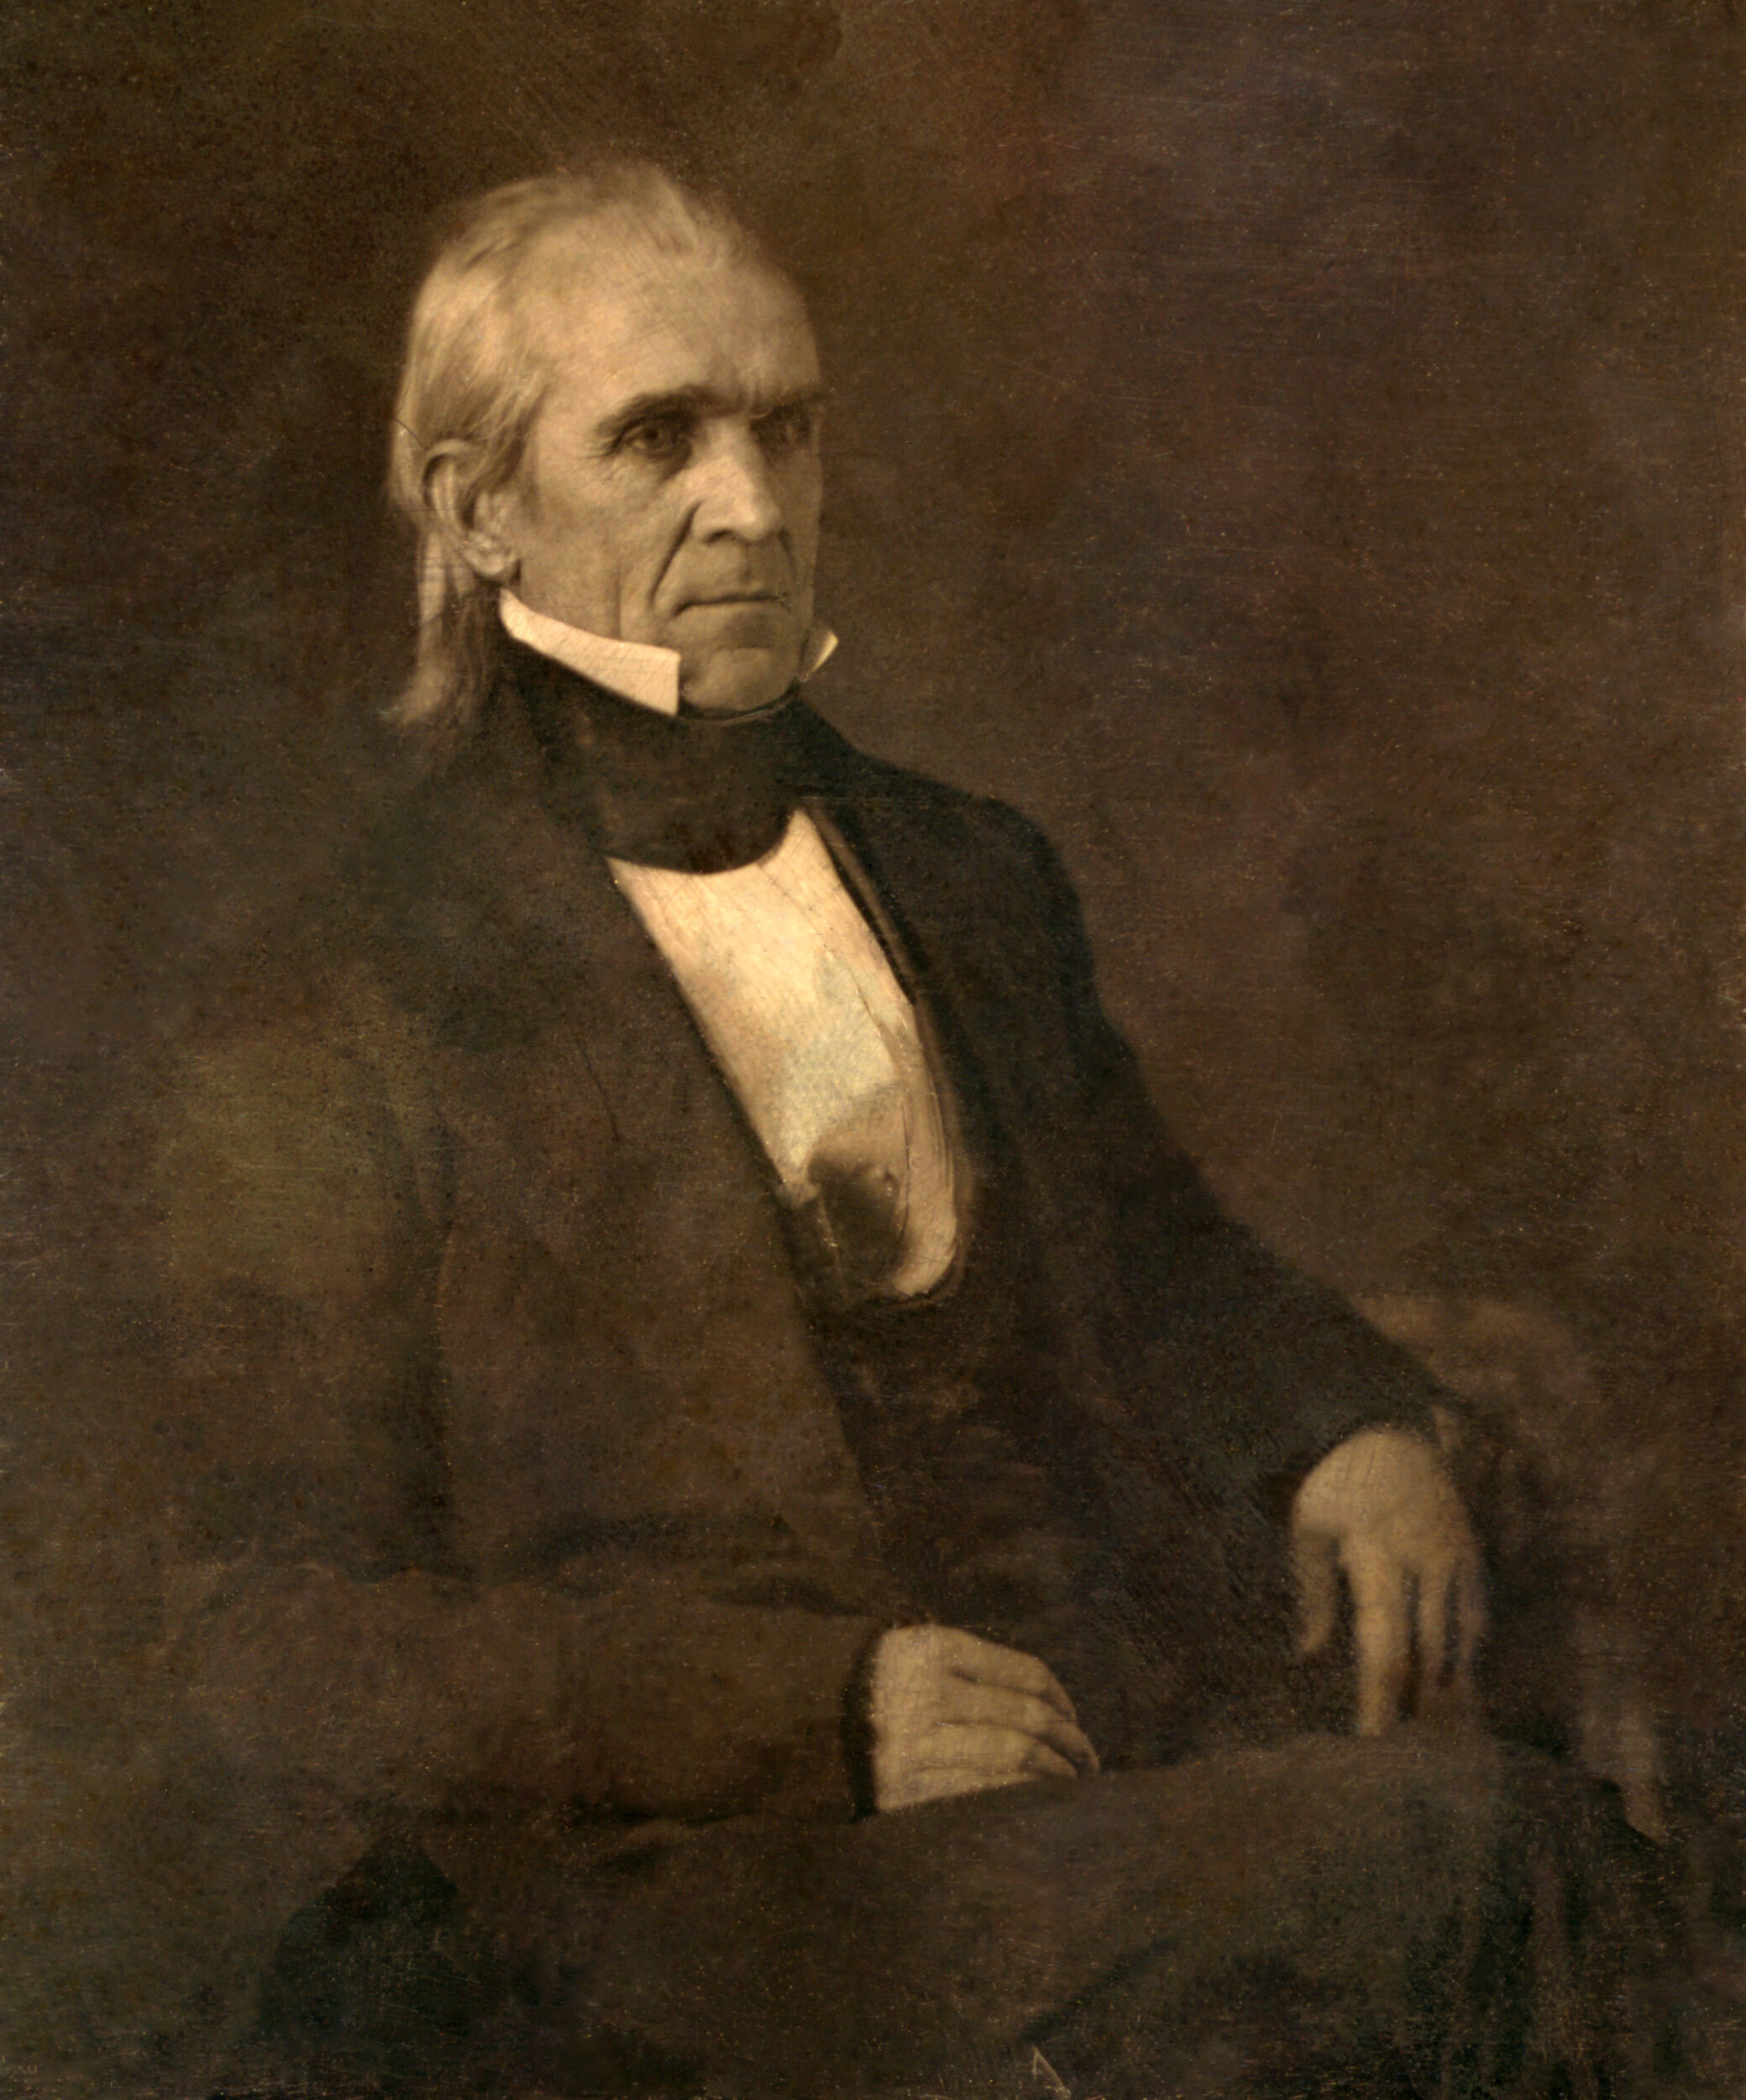 The First Portrait Photograph Ever Made